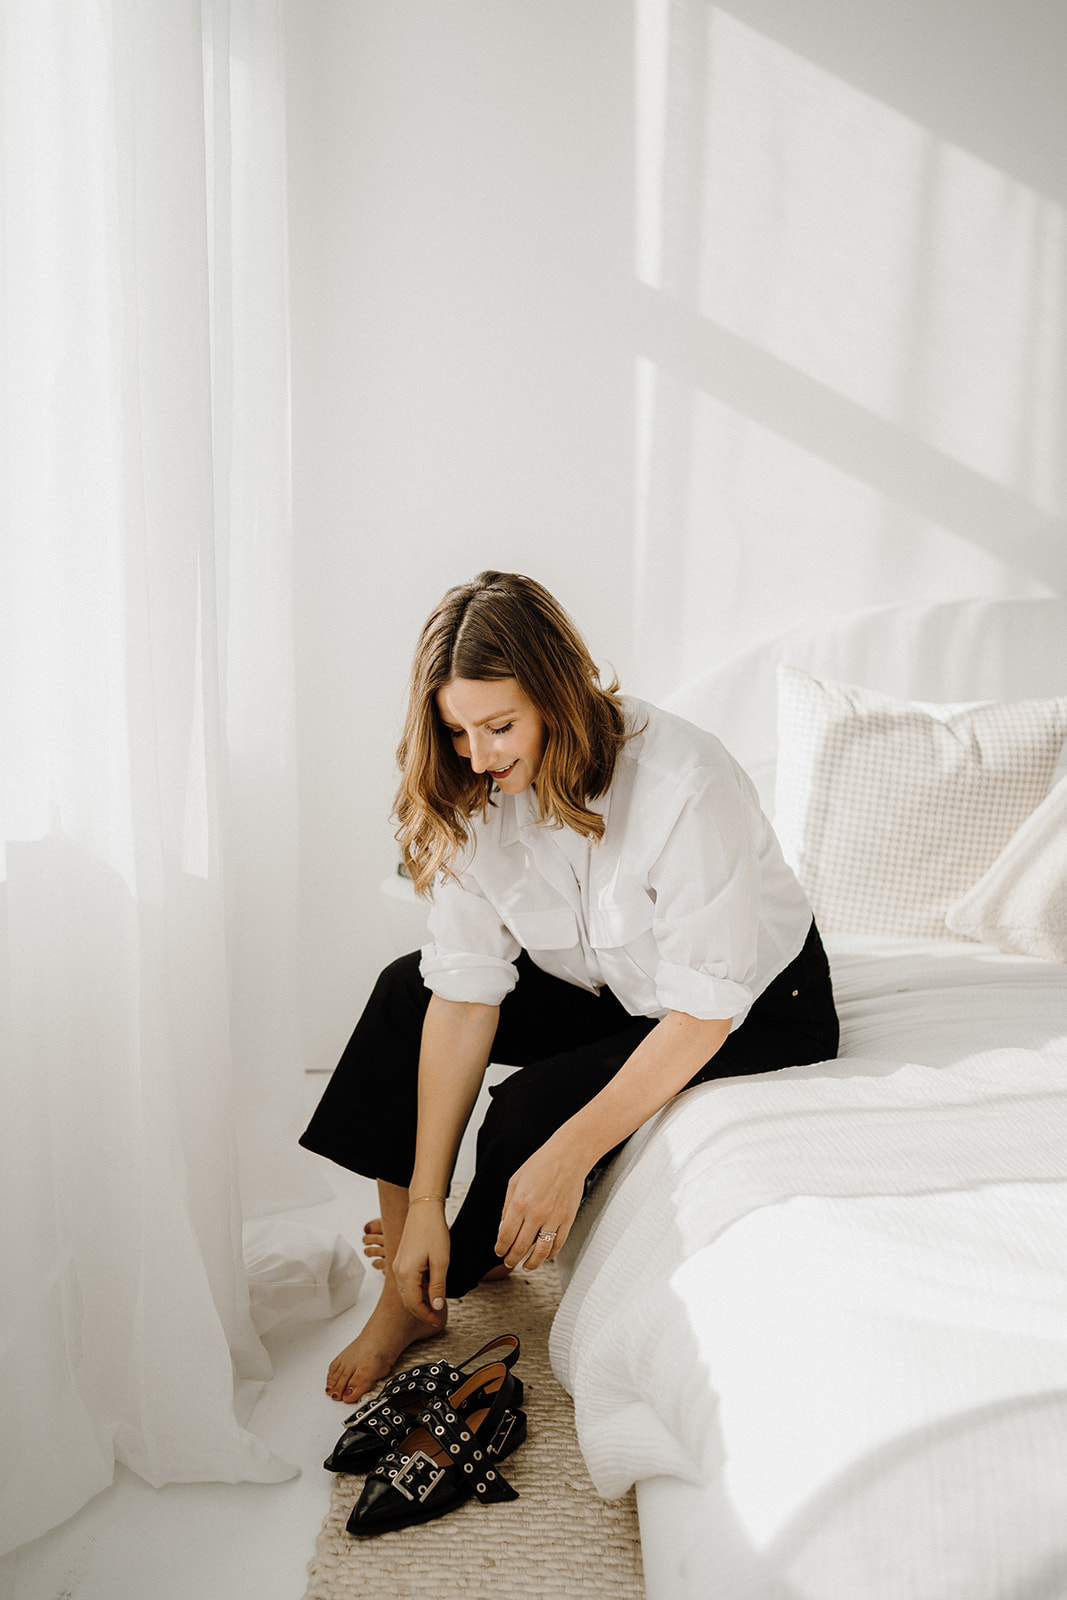 A lady sitting on the bed and reaching for her shoes.